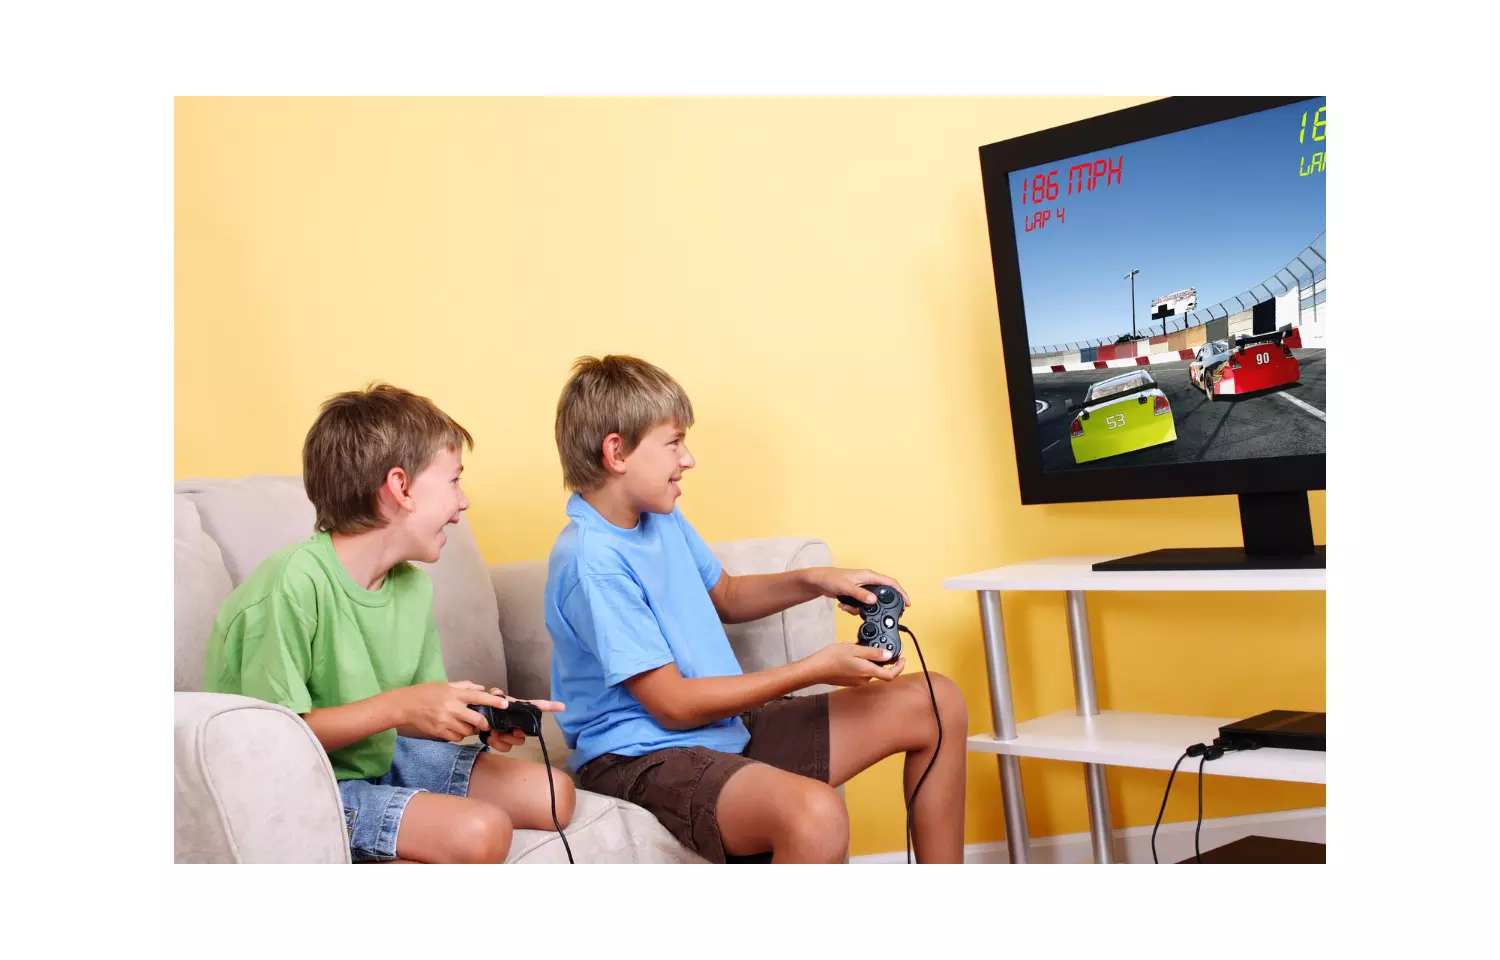 Violent video games do not lead to real-life violence among children: Study